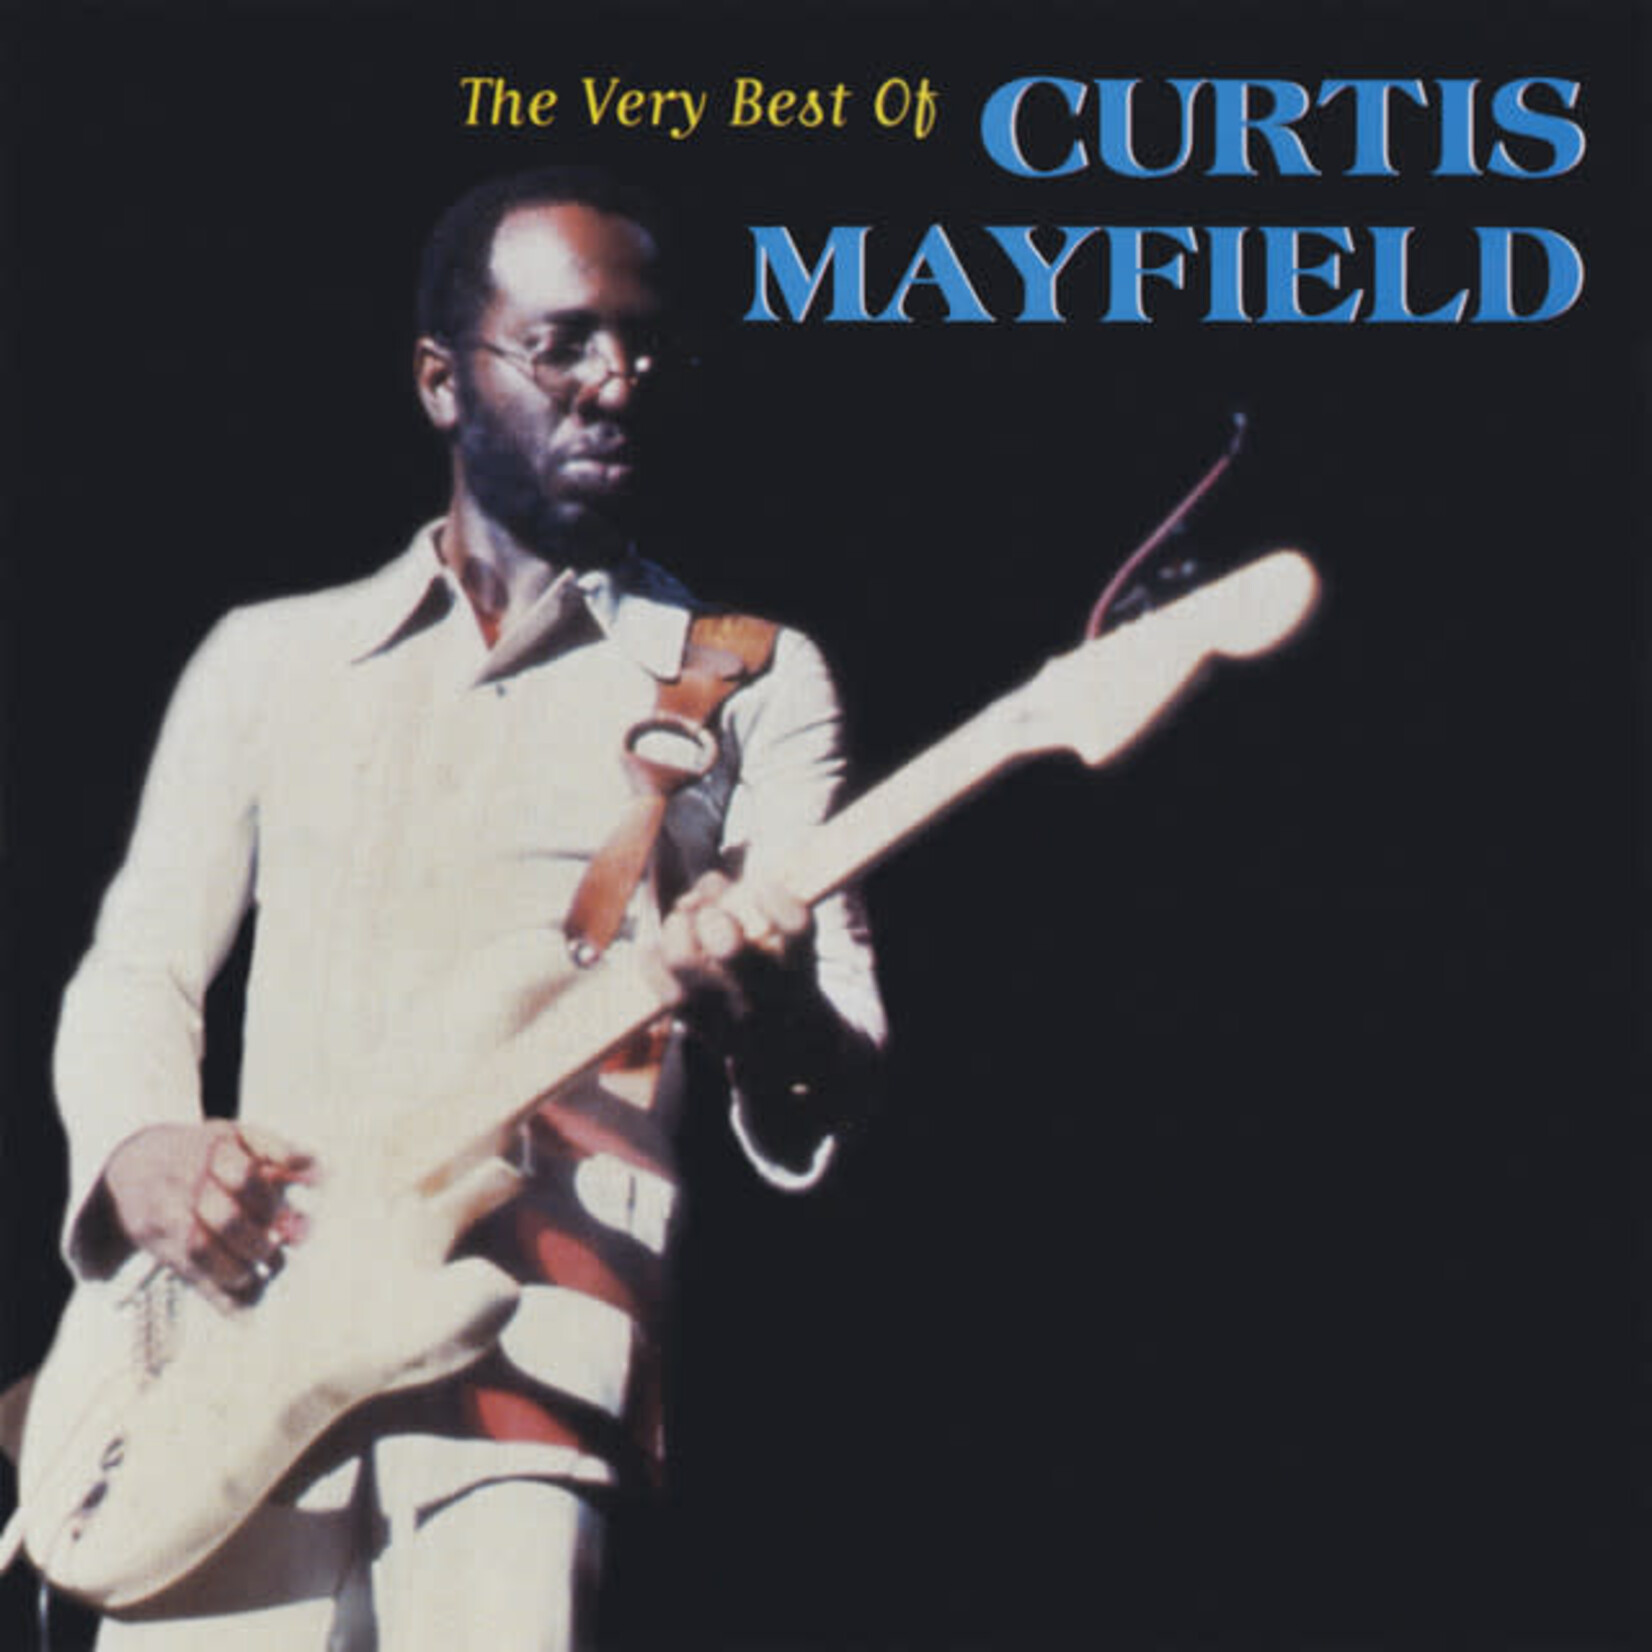 Curtis Mayfield - The Very Best Of Curtis Mayfield [CD]